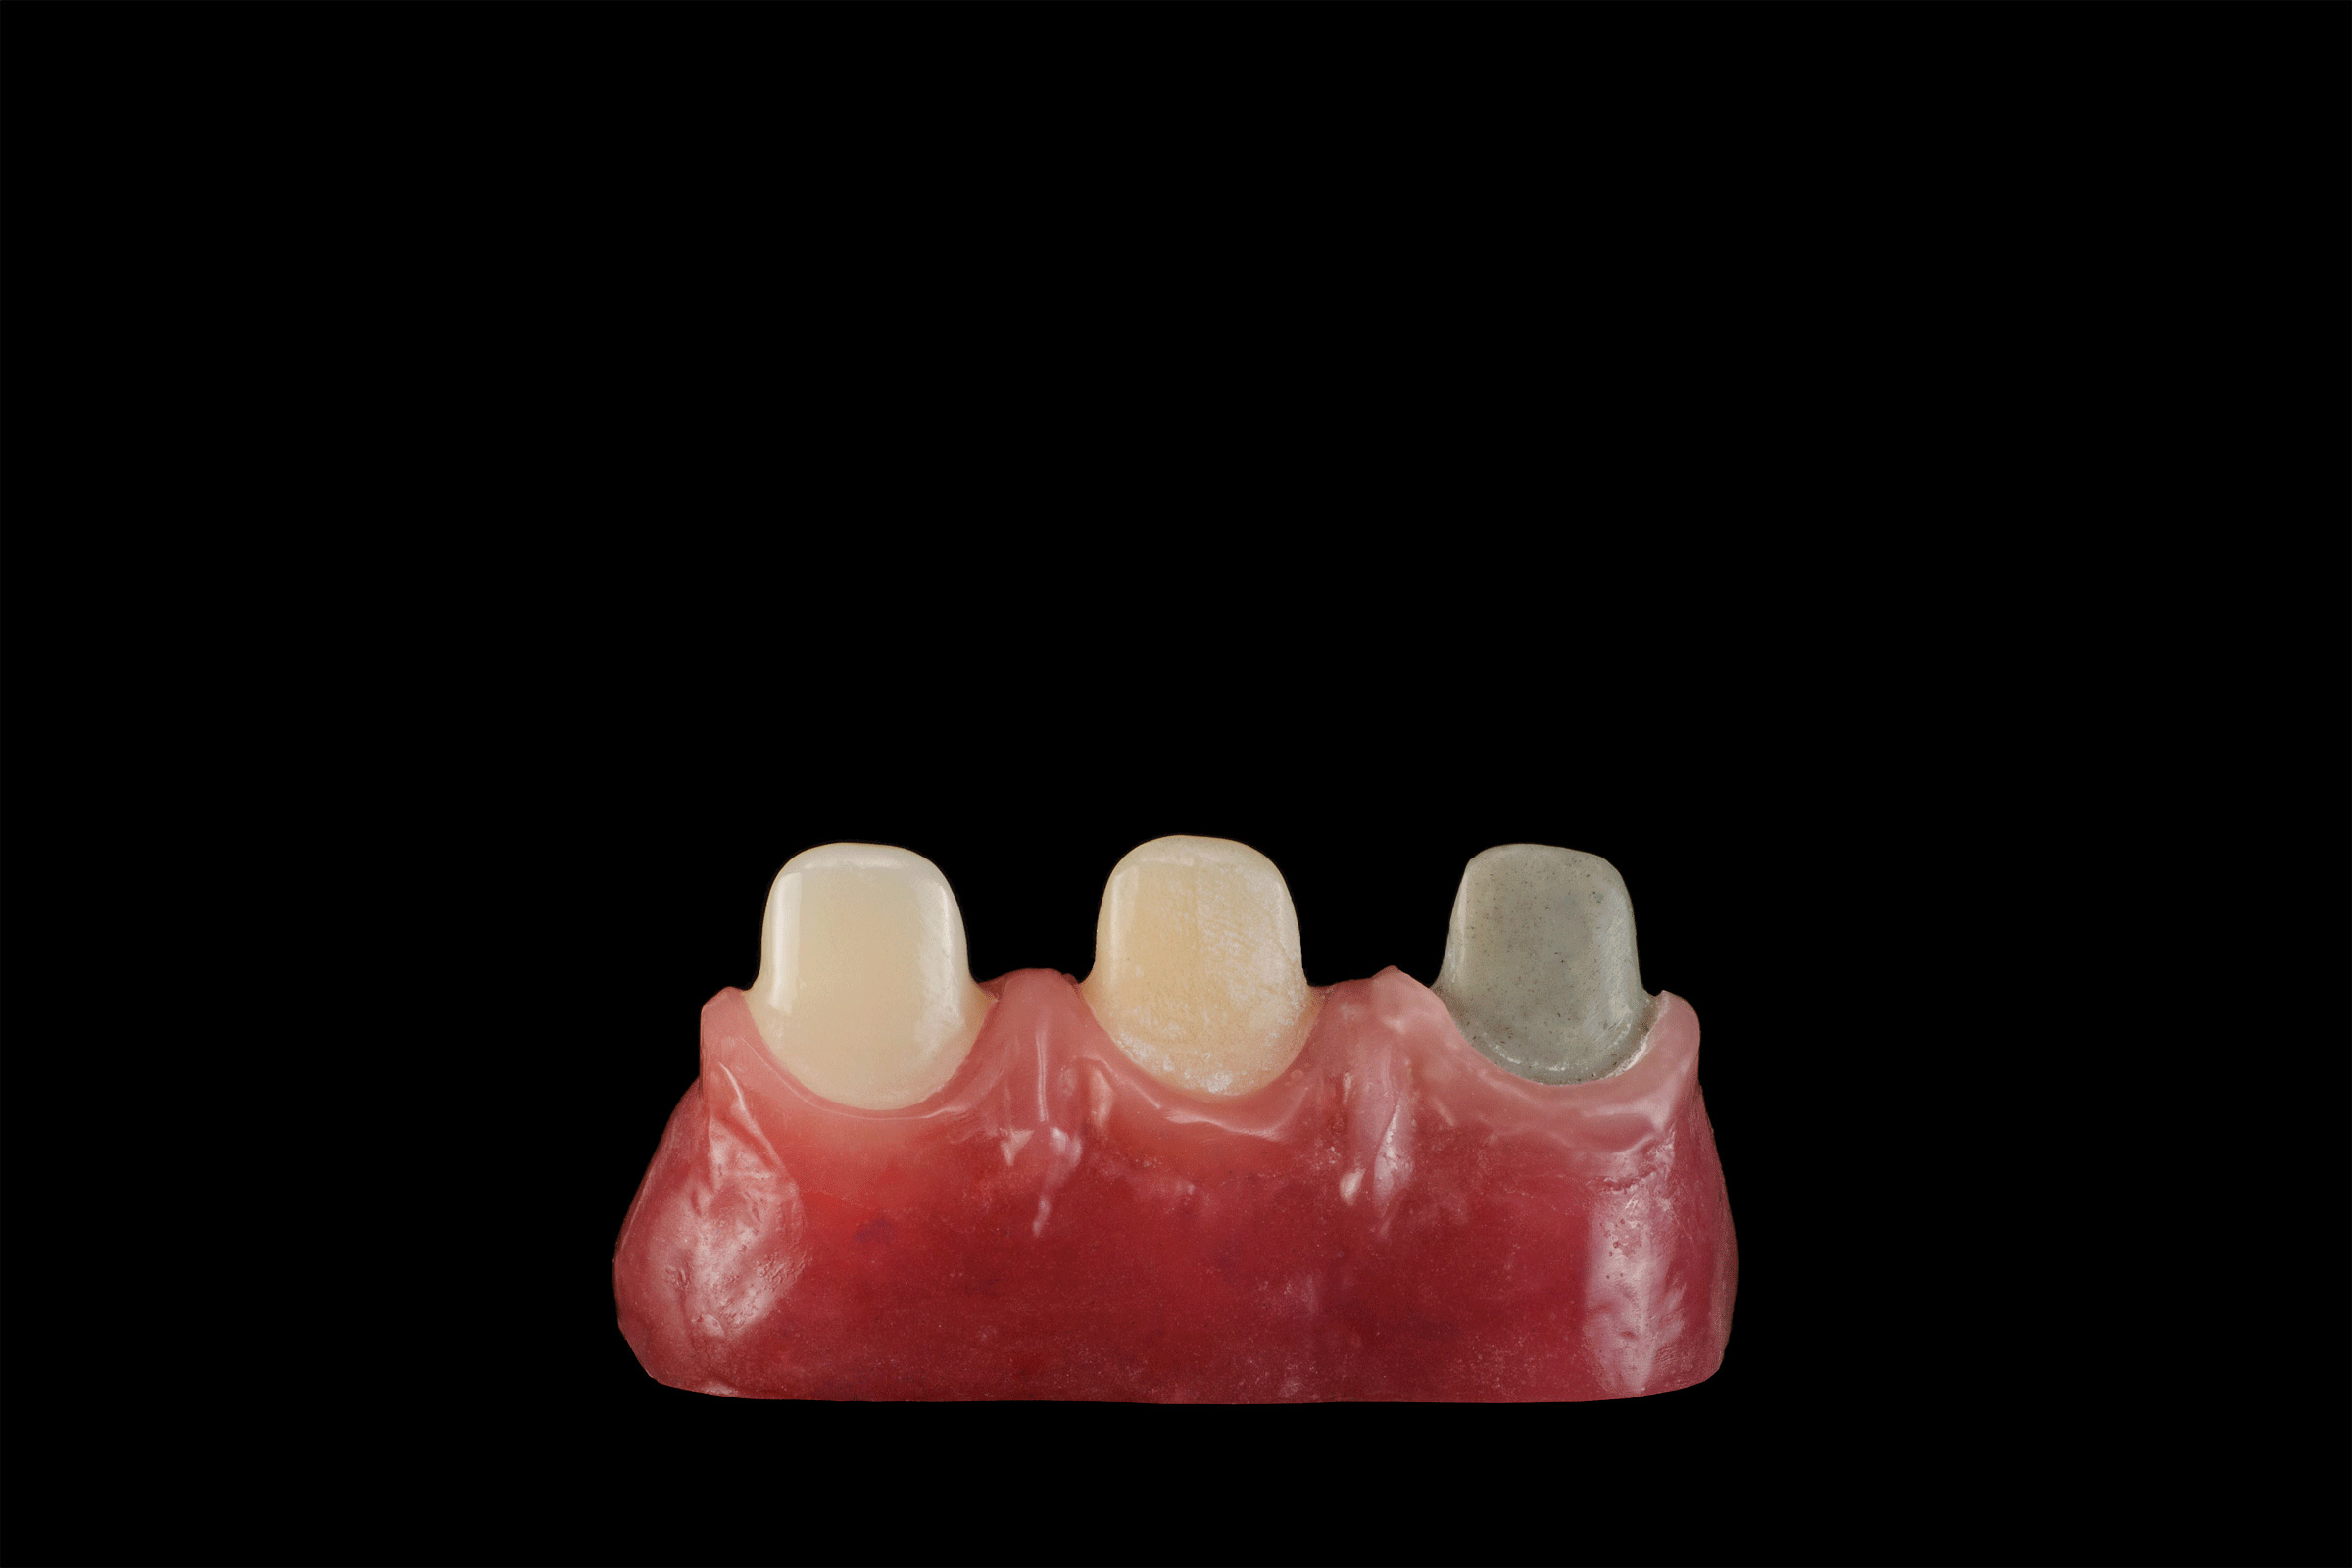 animated graphic of teeth